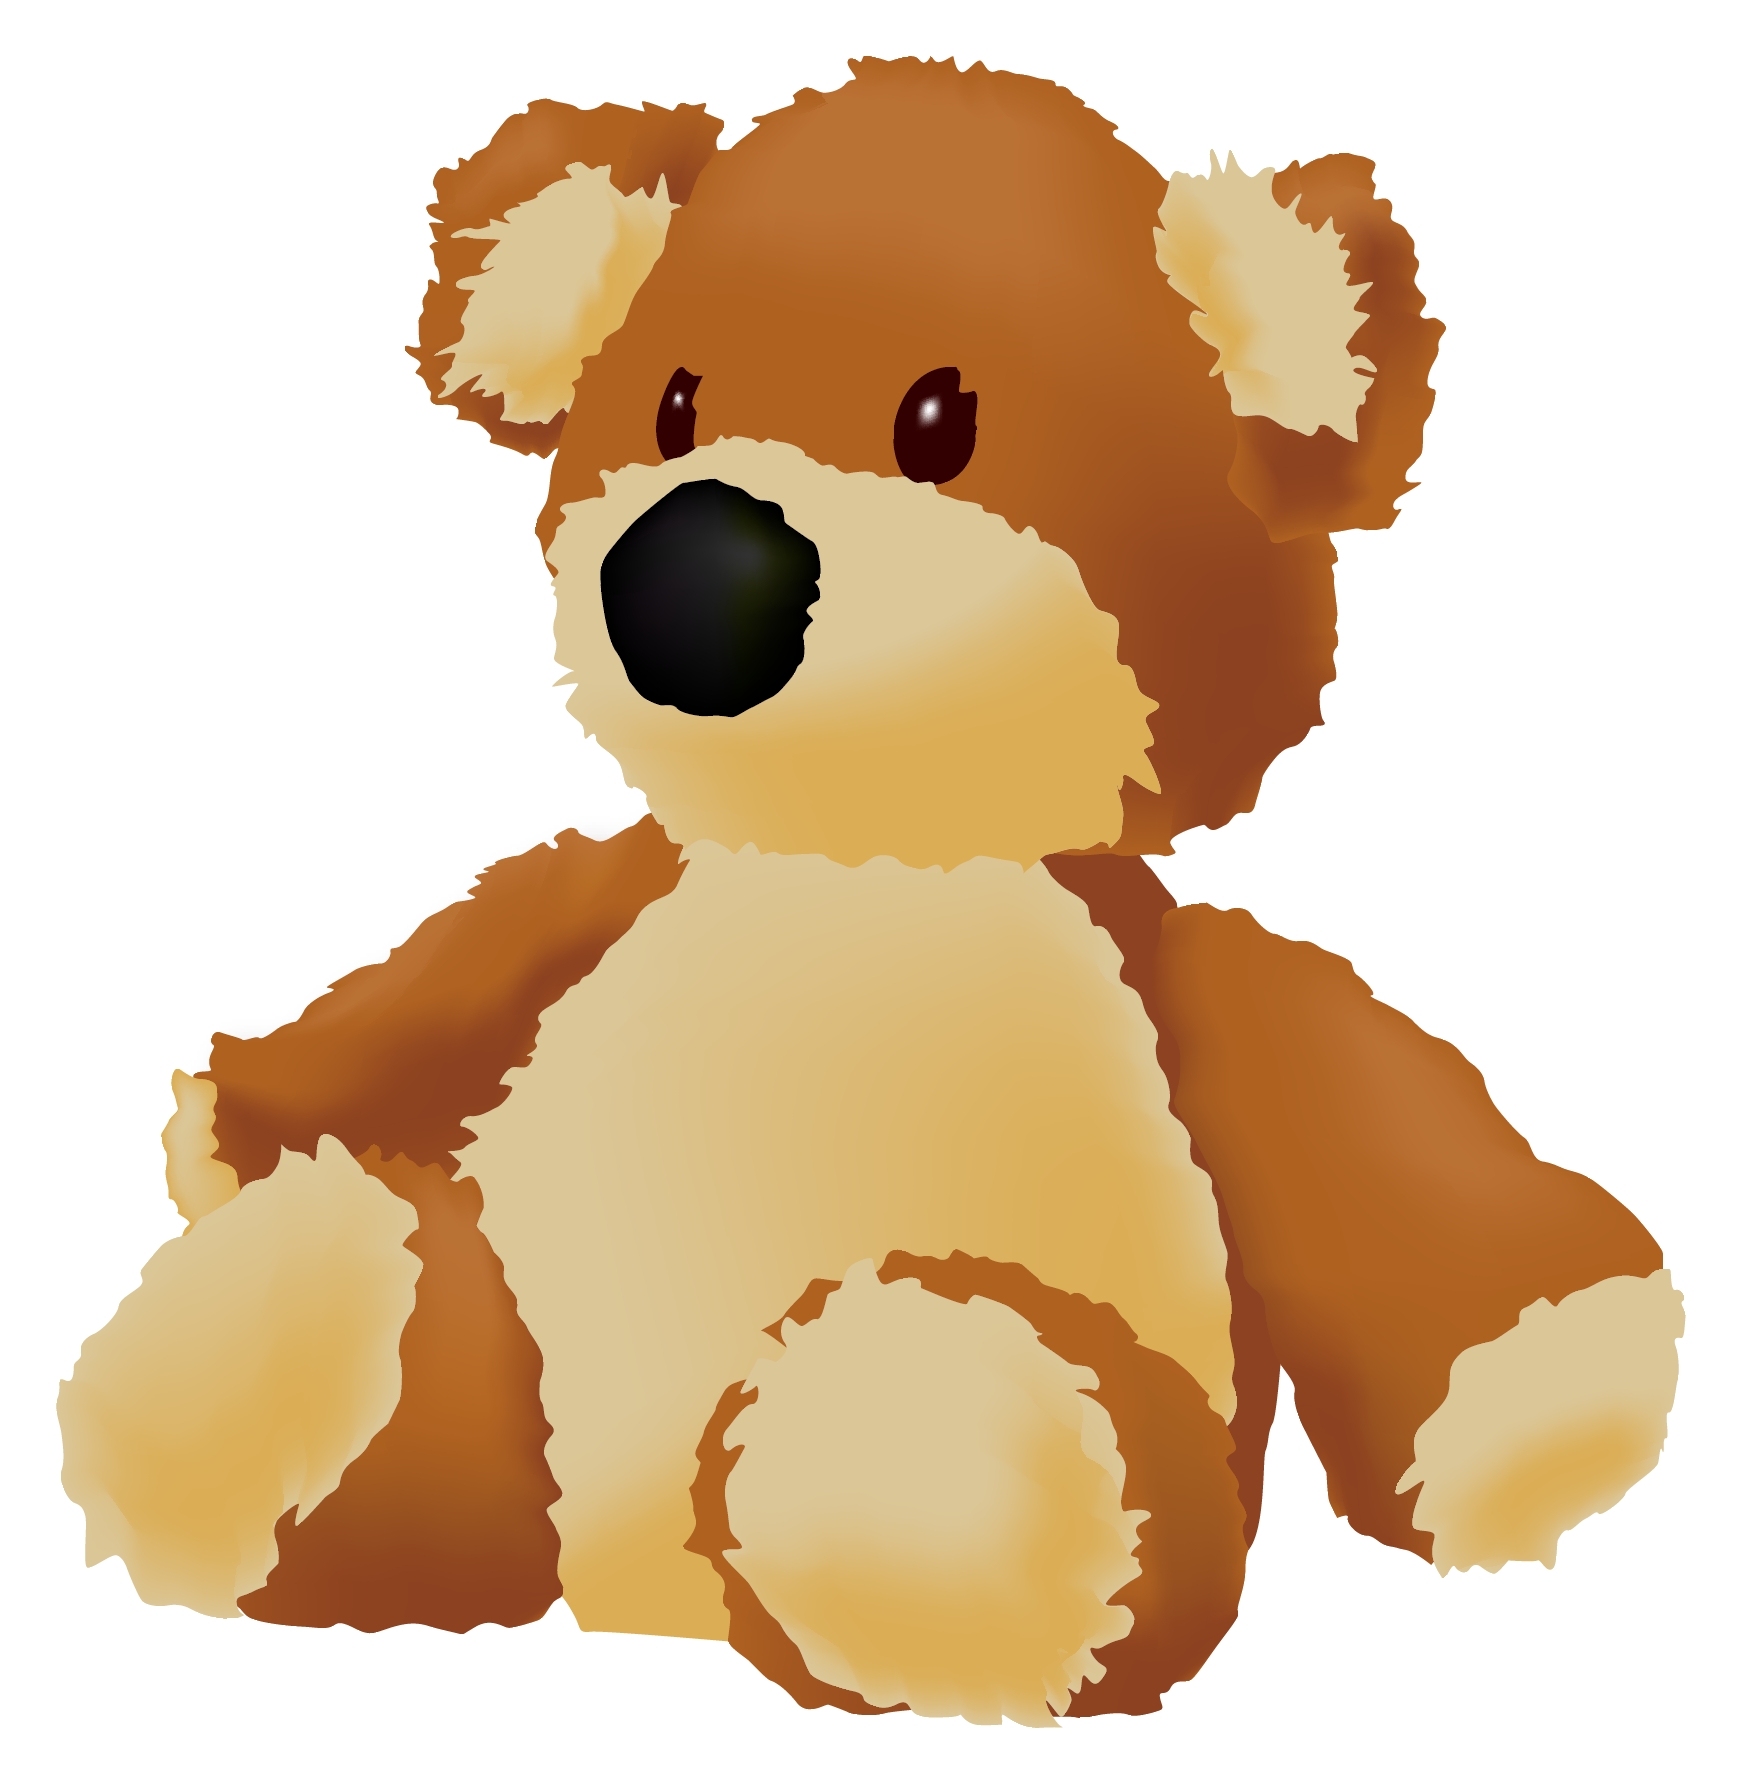 Teddy   Free Images At Clker Com   Vector Clip Art Online Royalty